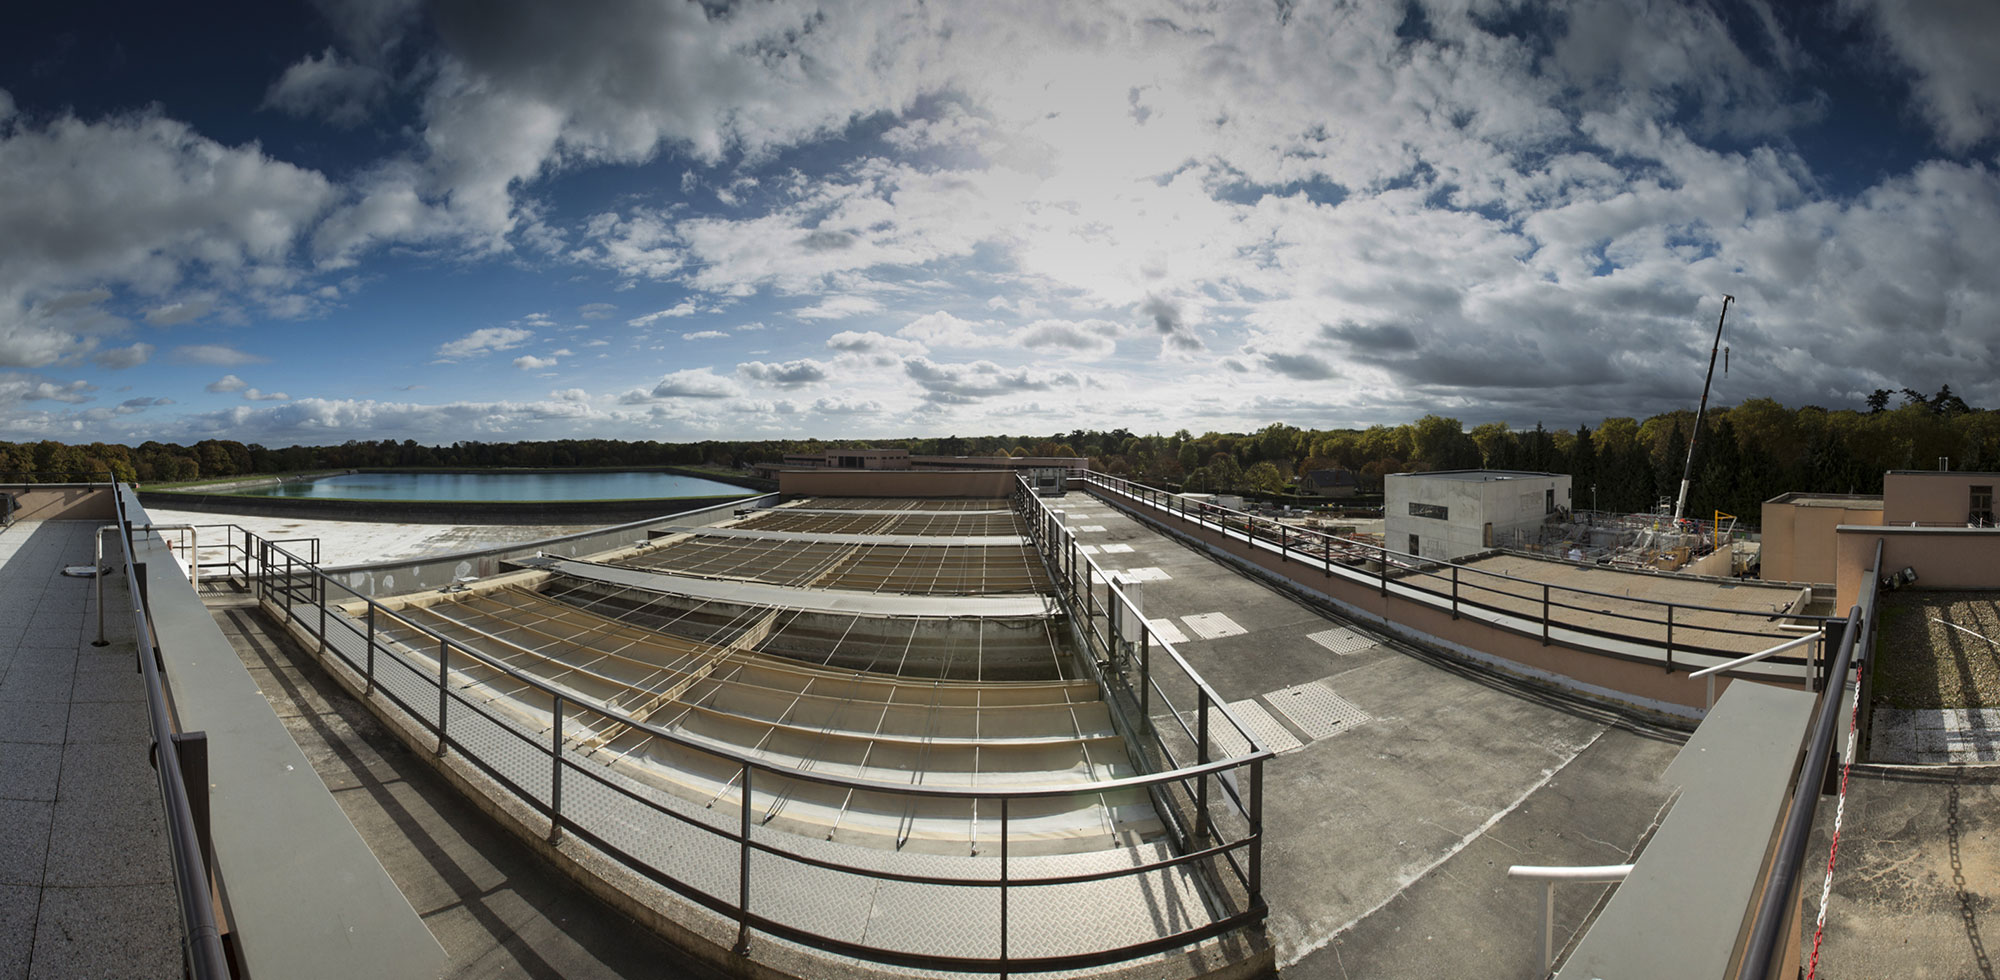 Design, build and operate a water treatment plant